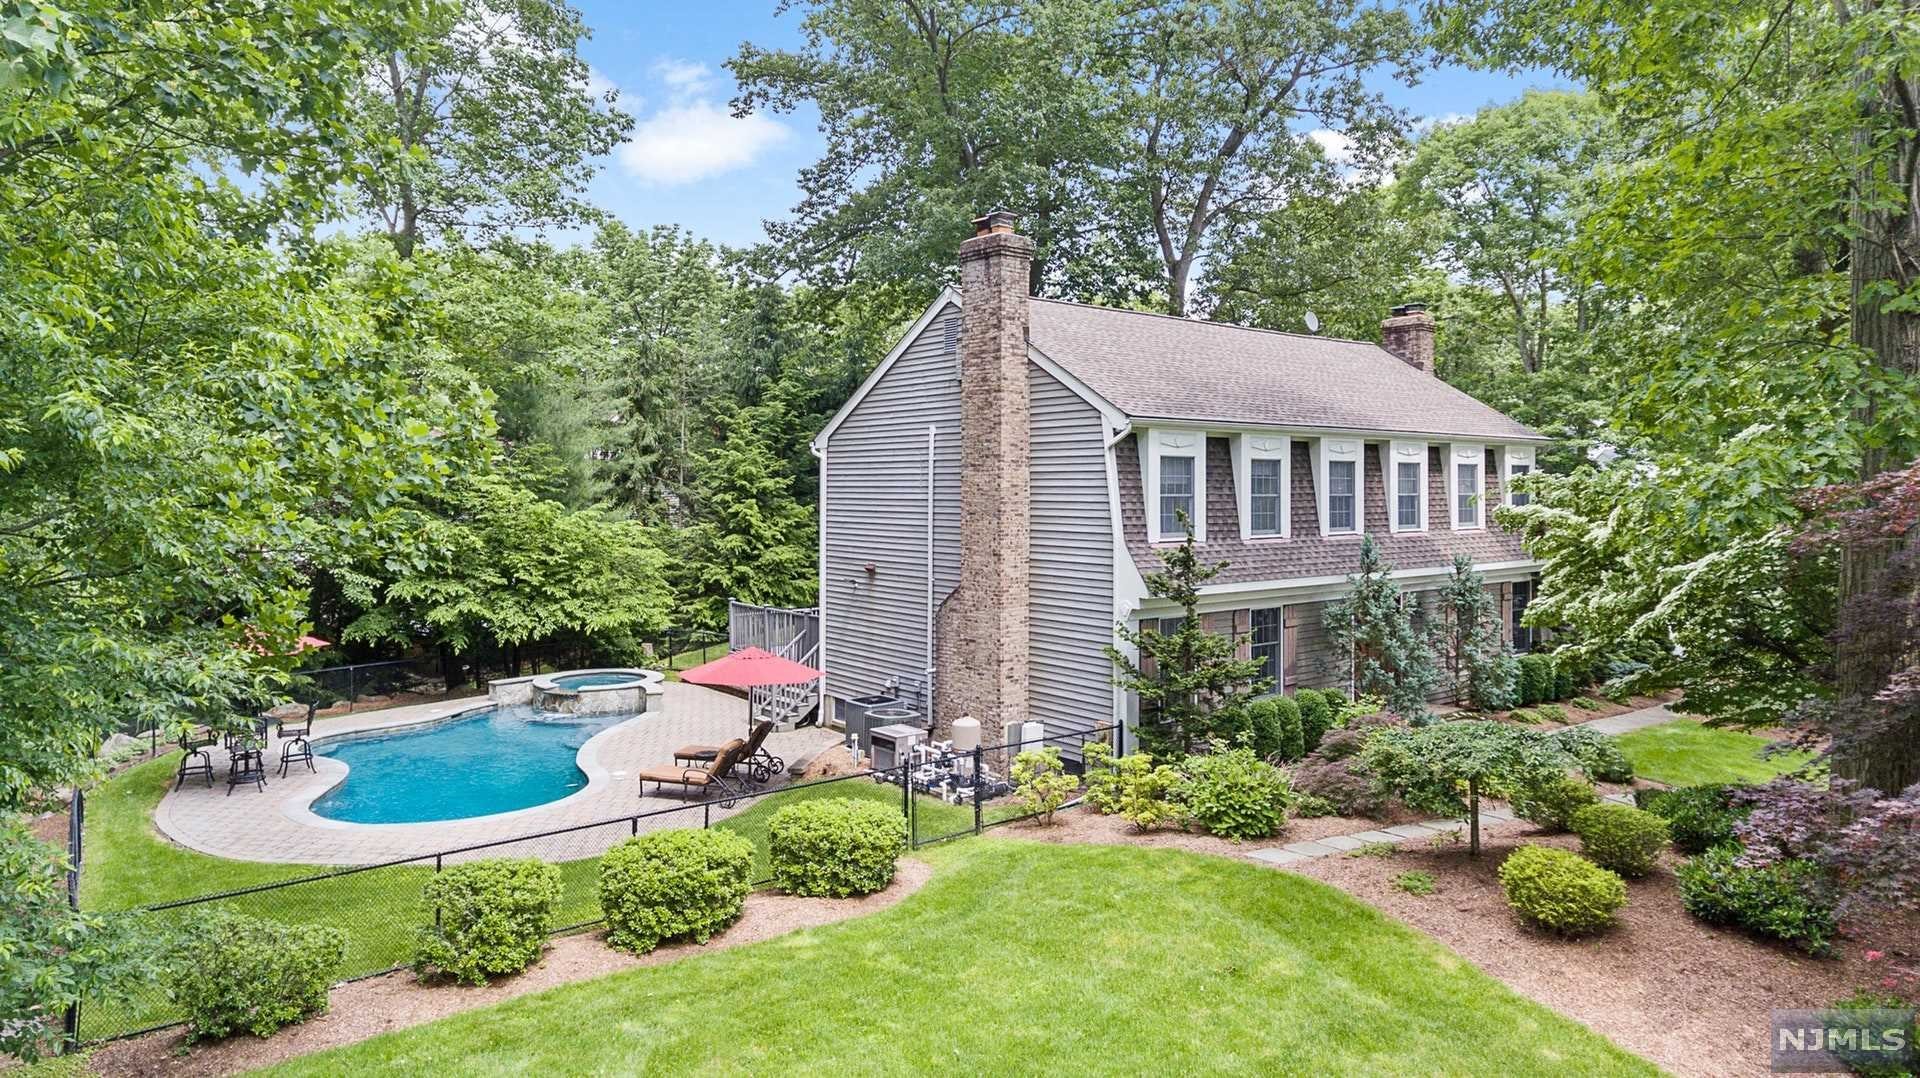 Wyckoff New Jersey Home: a luxury home for sale in Wyckoff Bergen